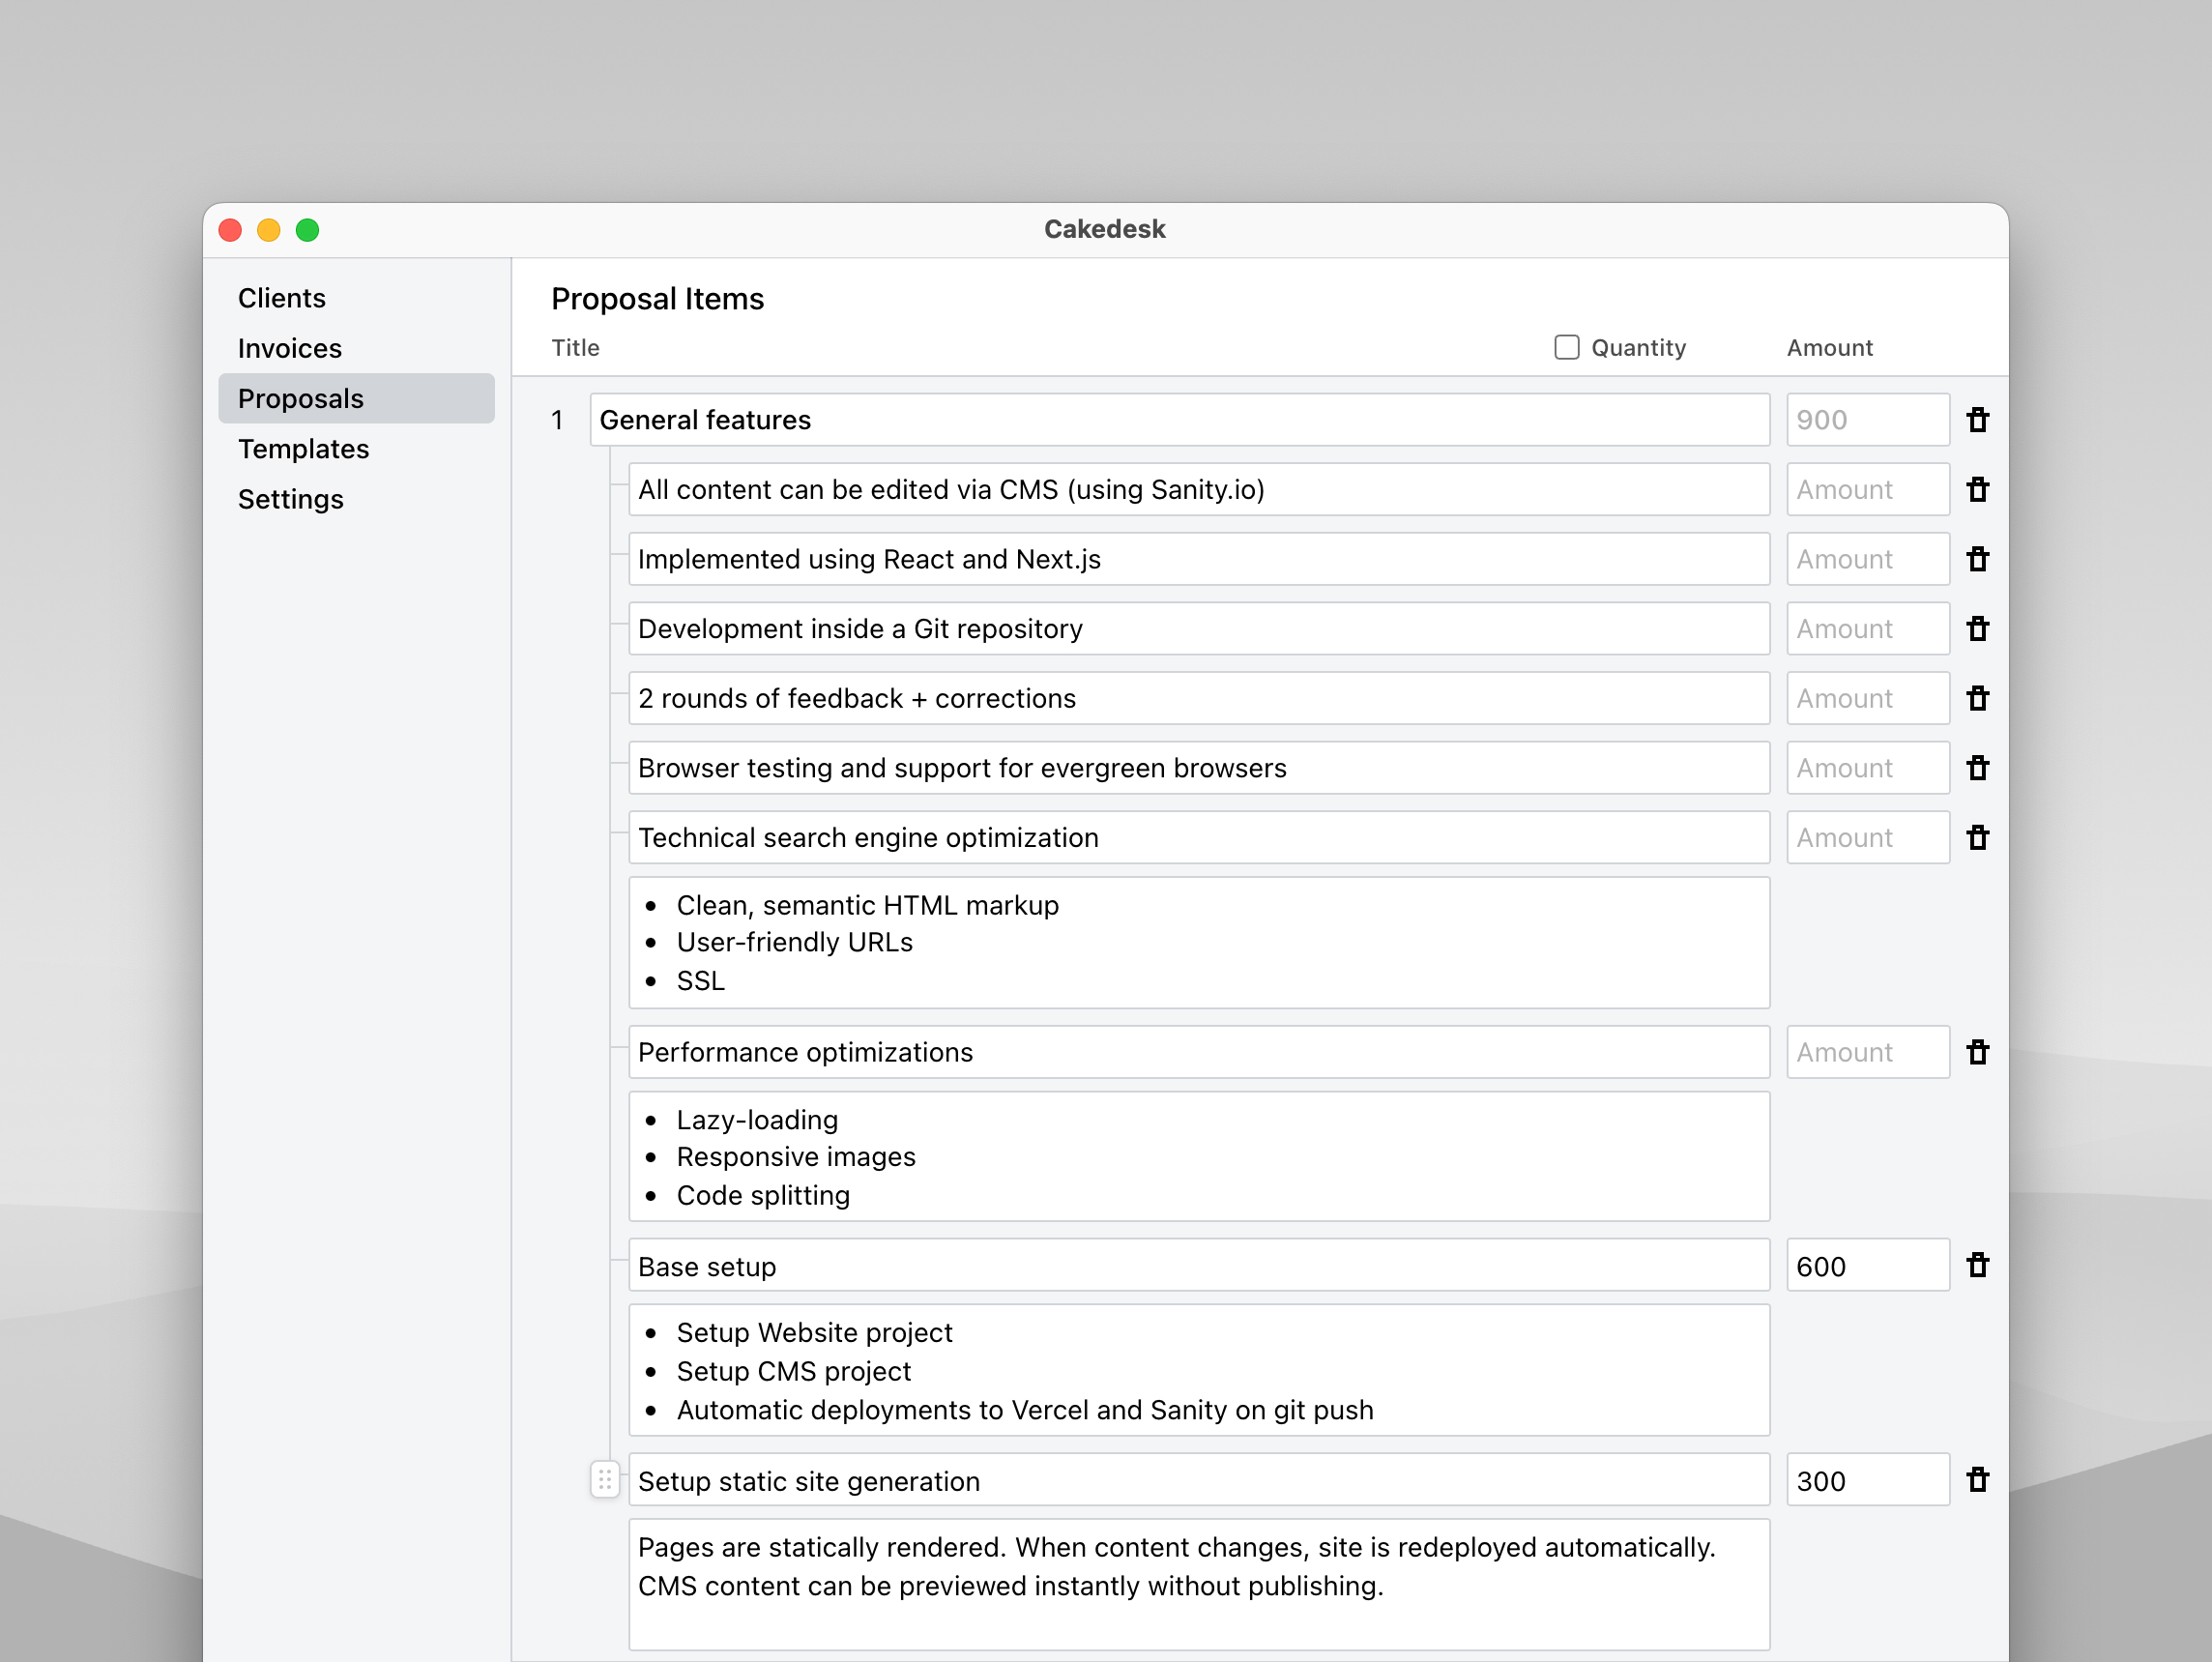 Screenshot of Cakedesk showing a proposal outline for general features of a website development project.